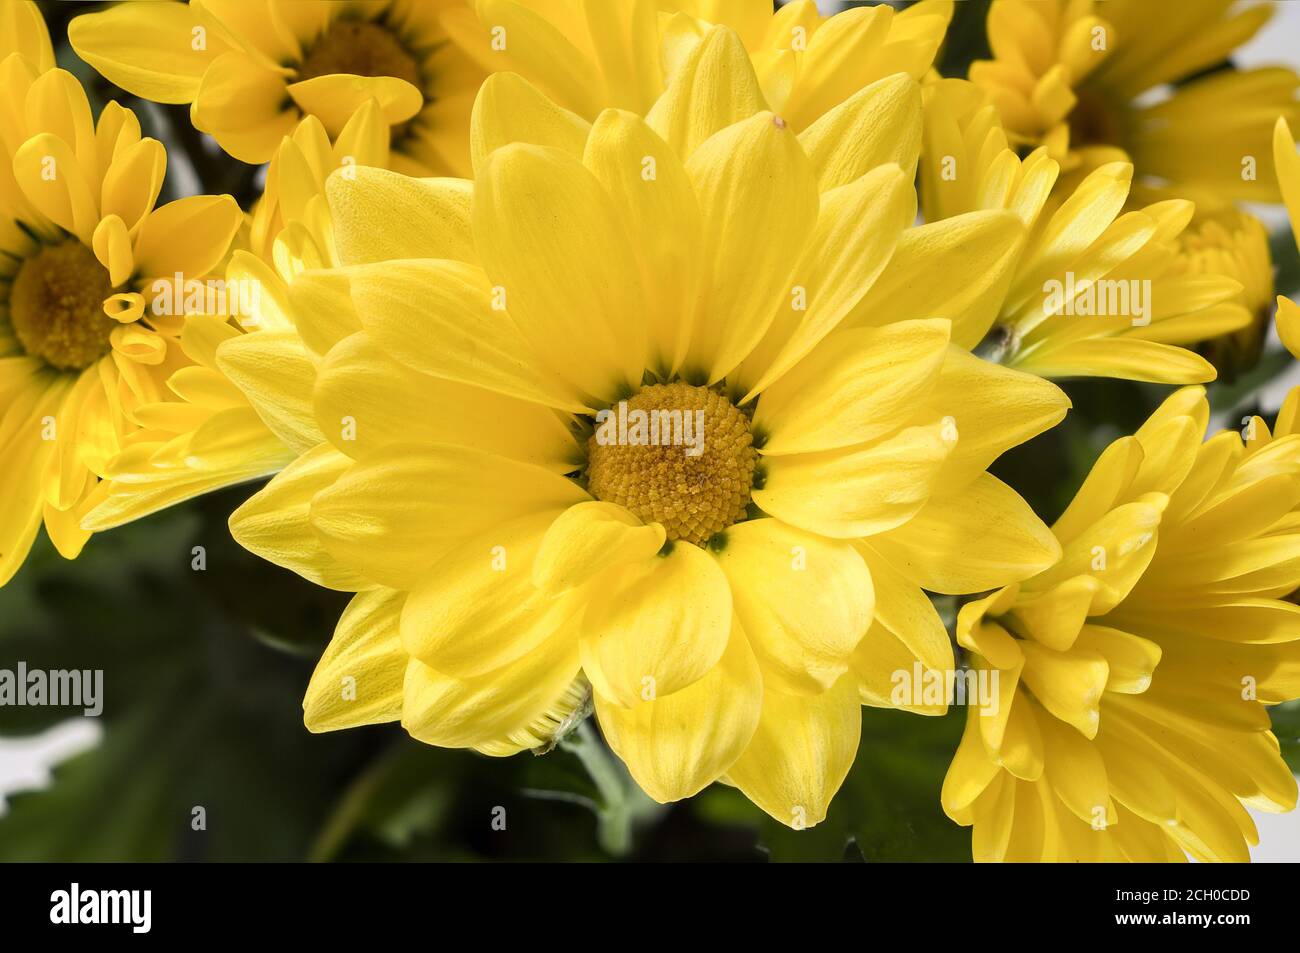 Chrysanthemum indicum - a bouquet of tiny yellow flowers that bloom nicely against a bright background, photographed at close range Stock Photo